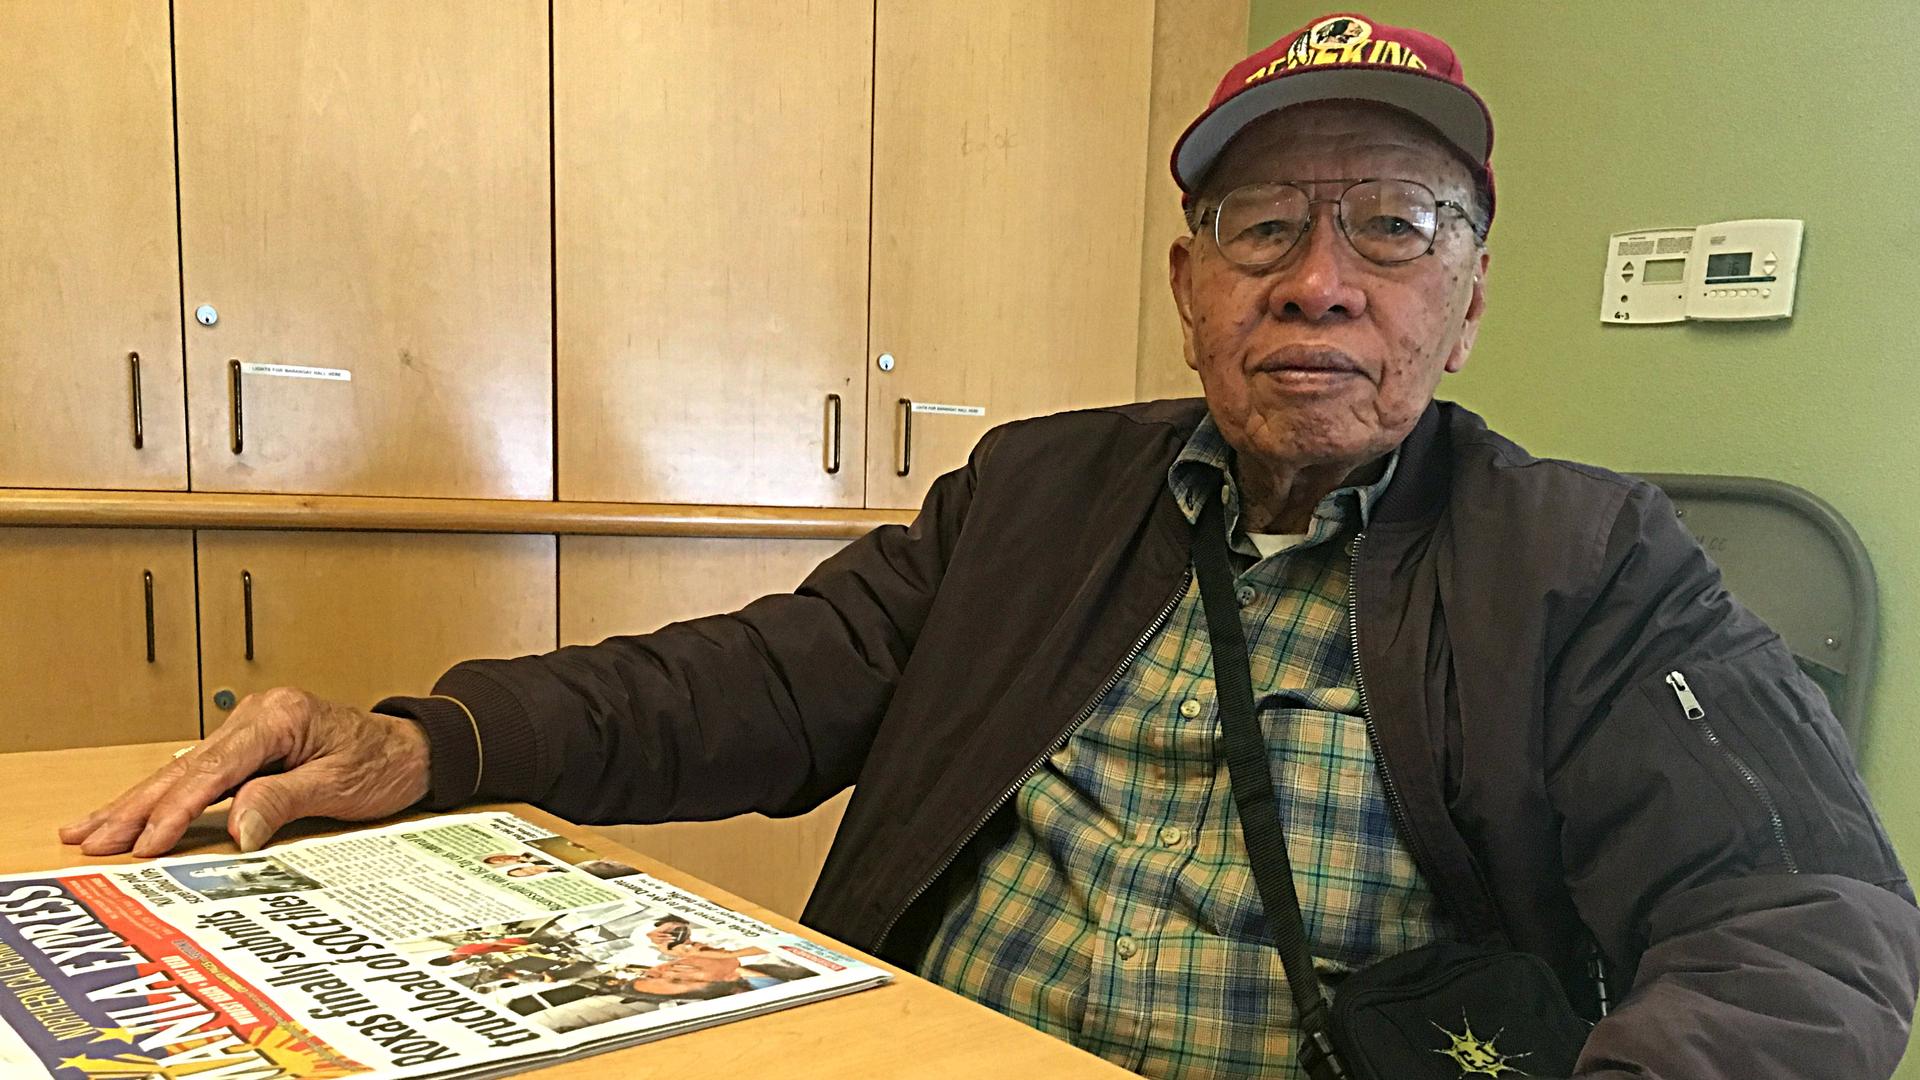 An elderly man sitting at a table with photos